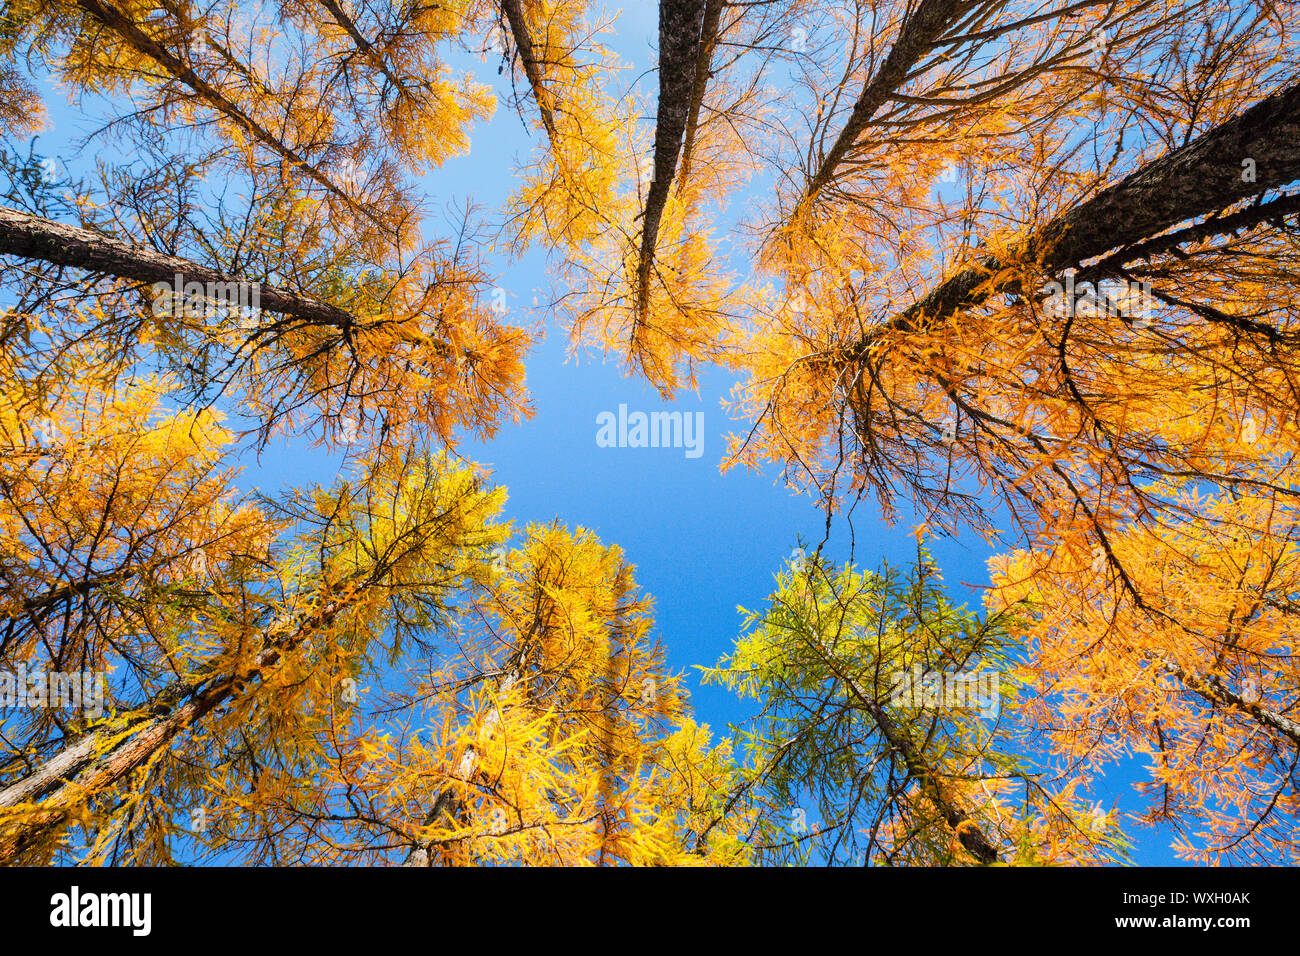 Common Larch, European Larch (Larix decidua). View through the treetops of a forest in autumn into the sky. Stock Photo